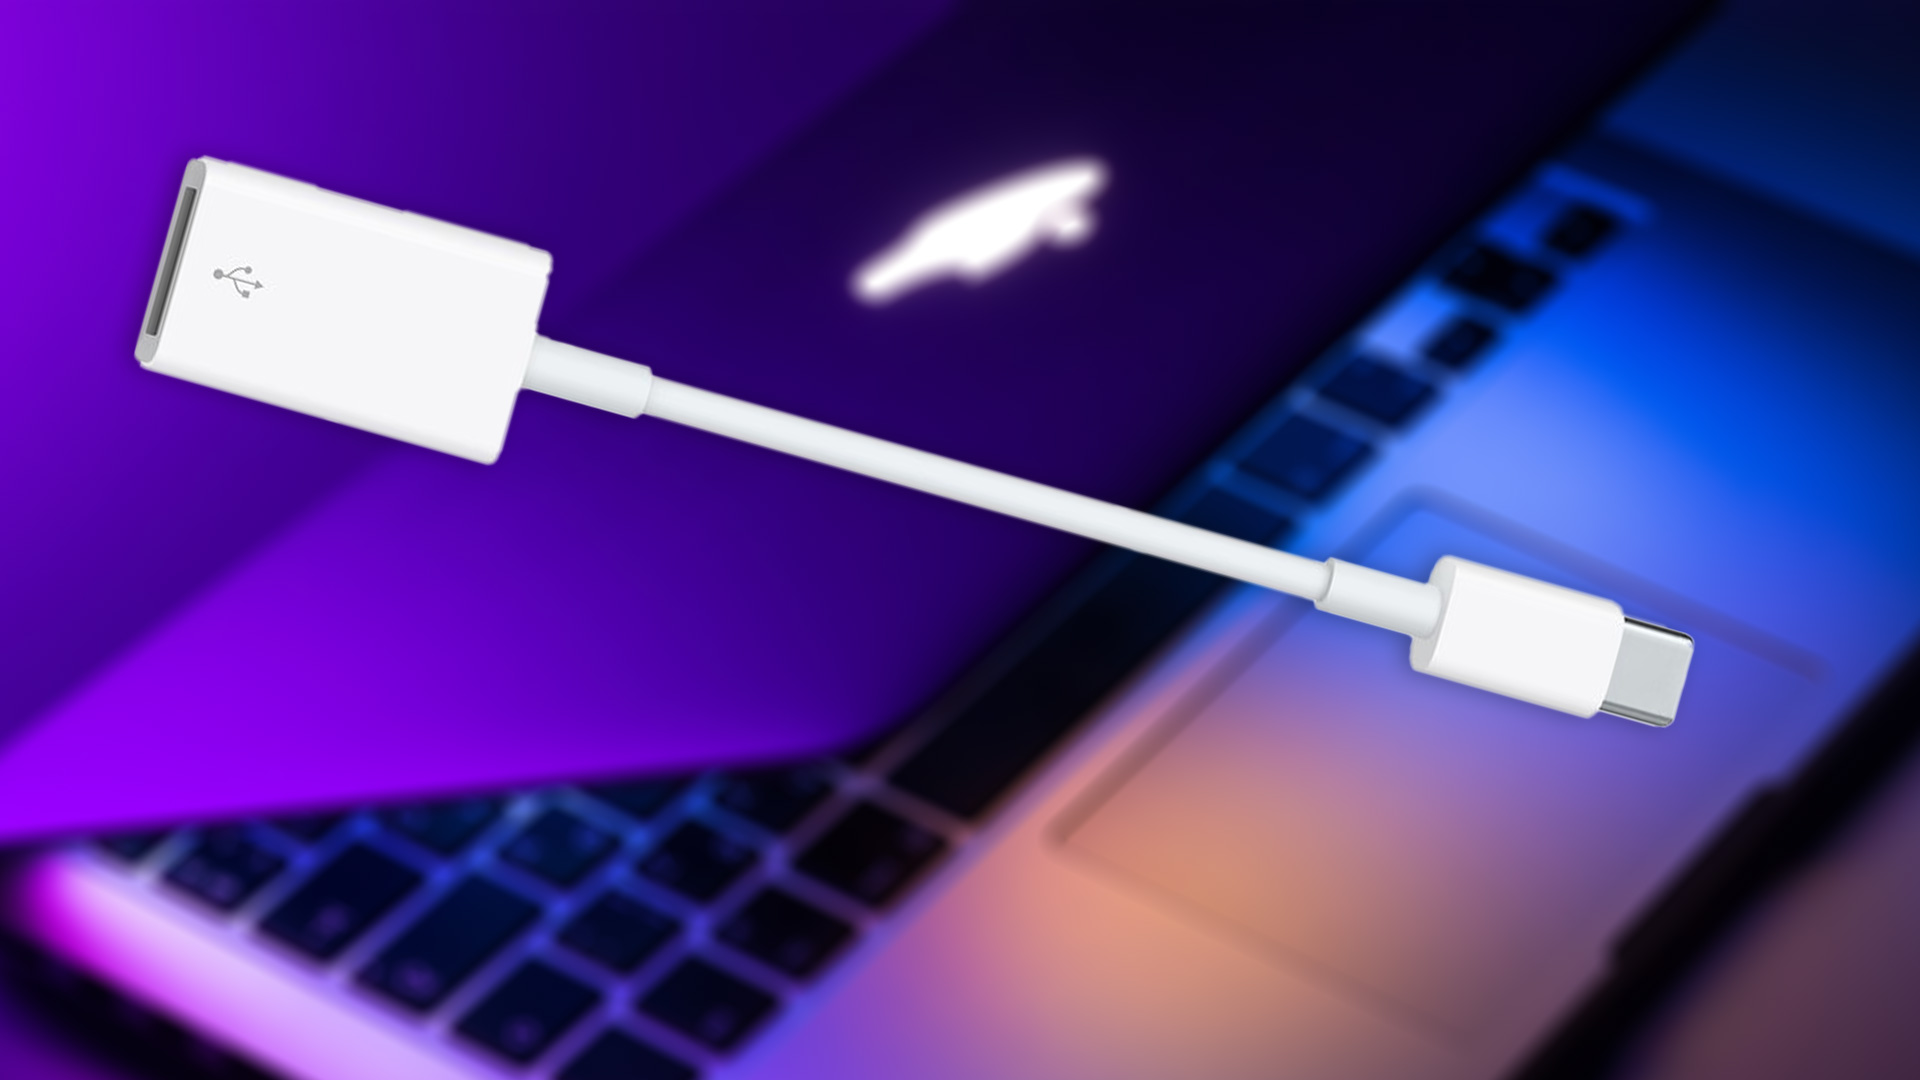 Check the connection:
Ensure that the USB cable is securely plugged into the Mac.